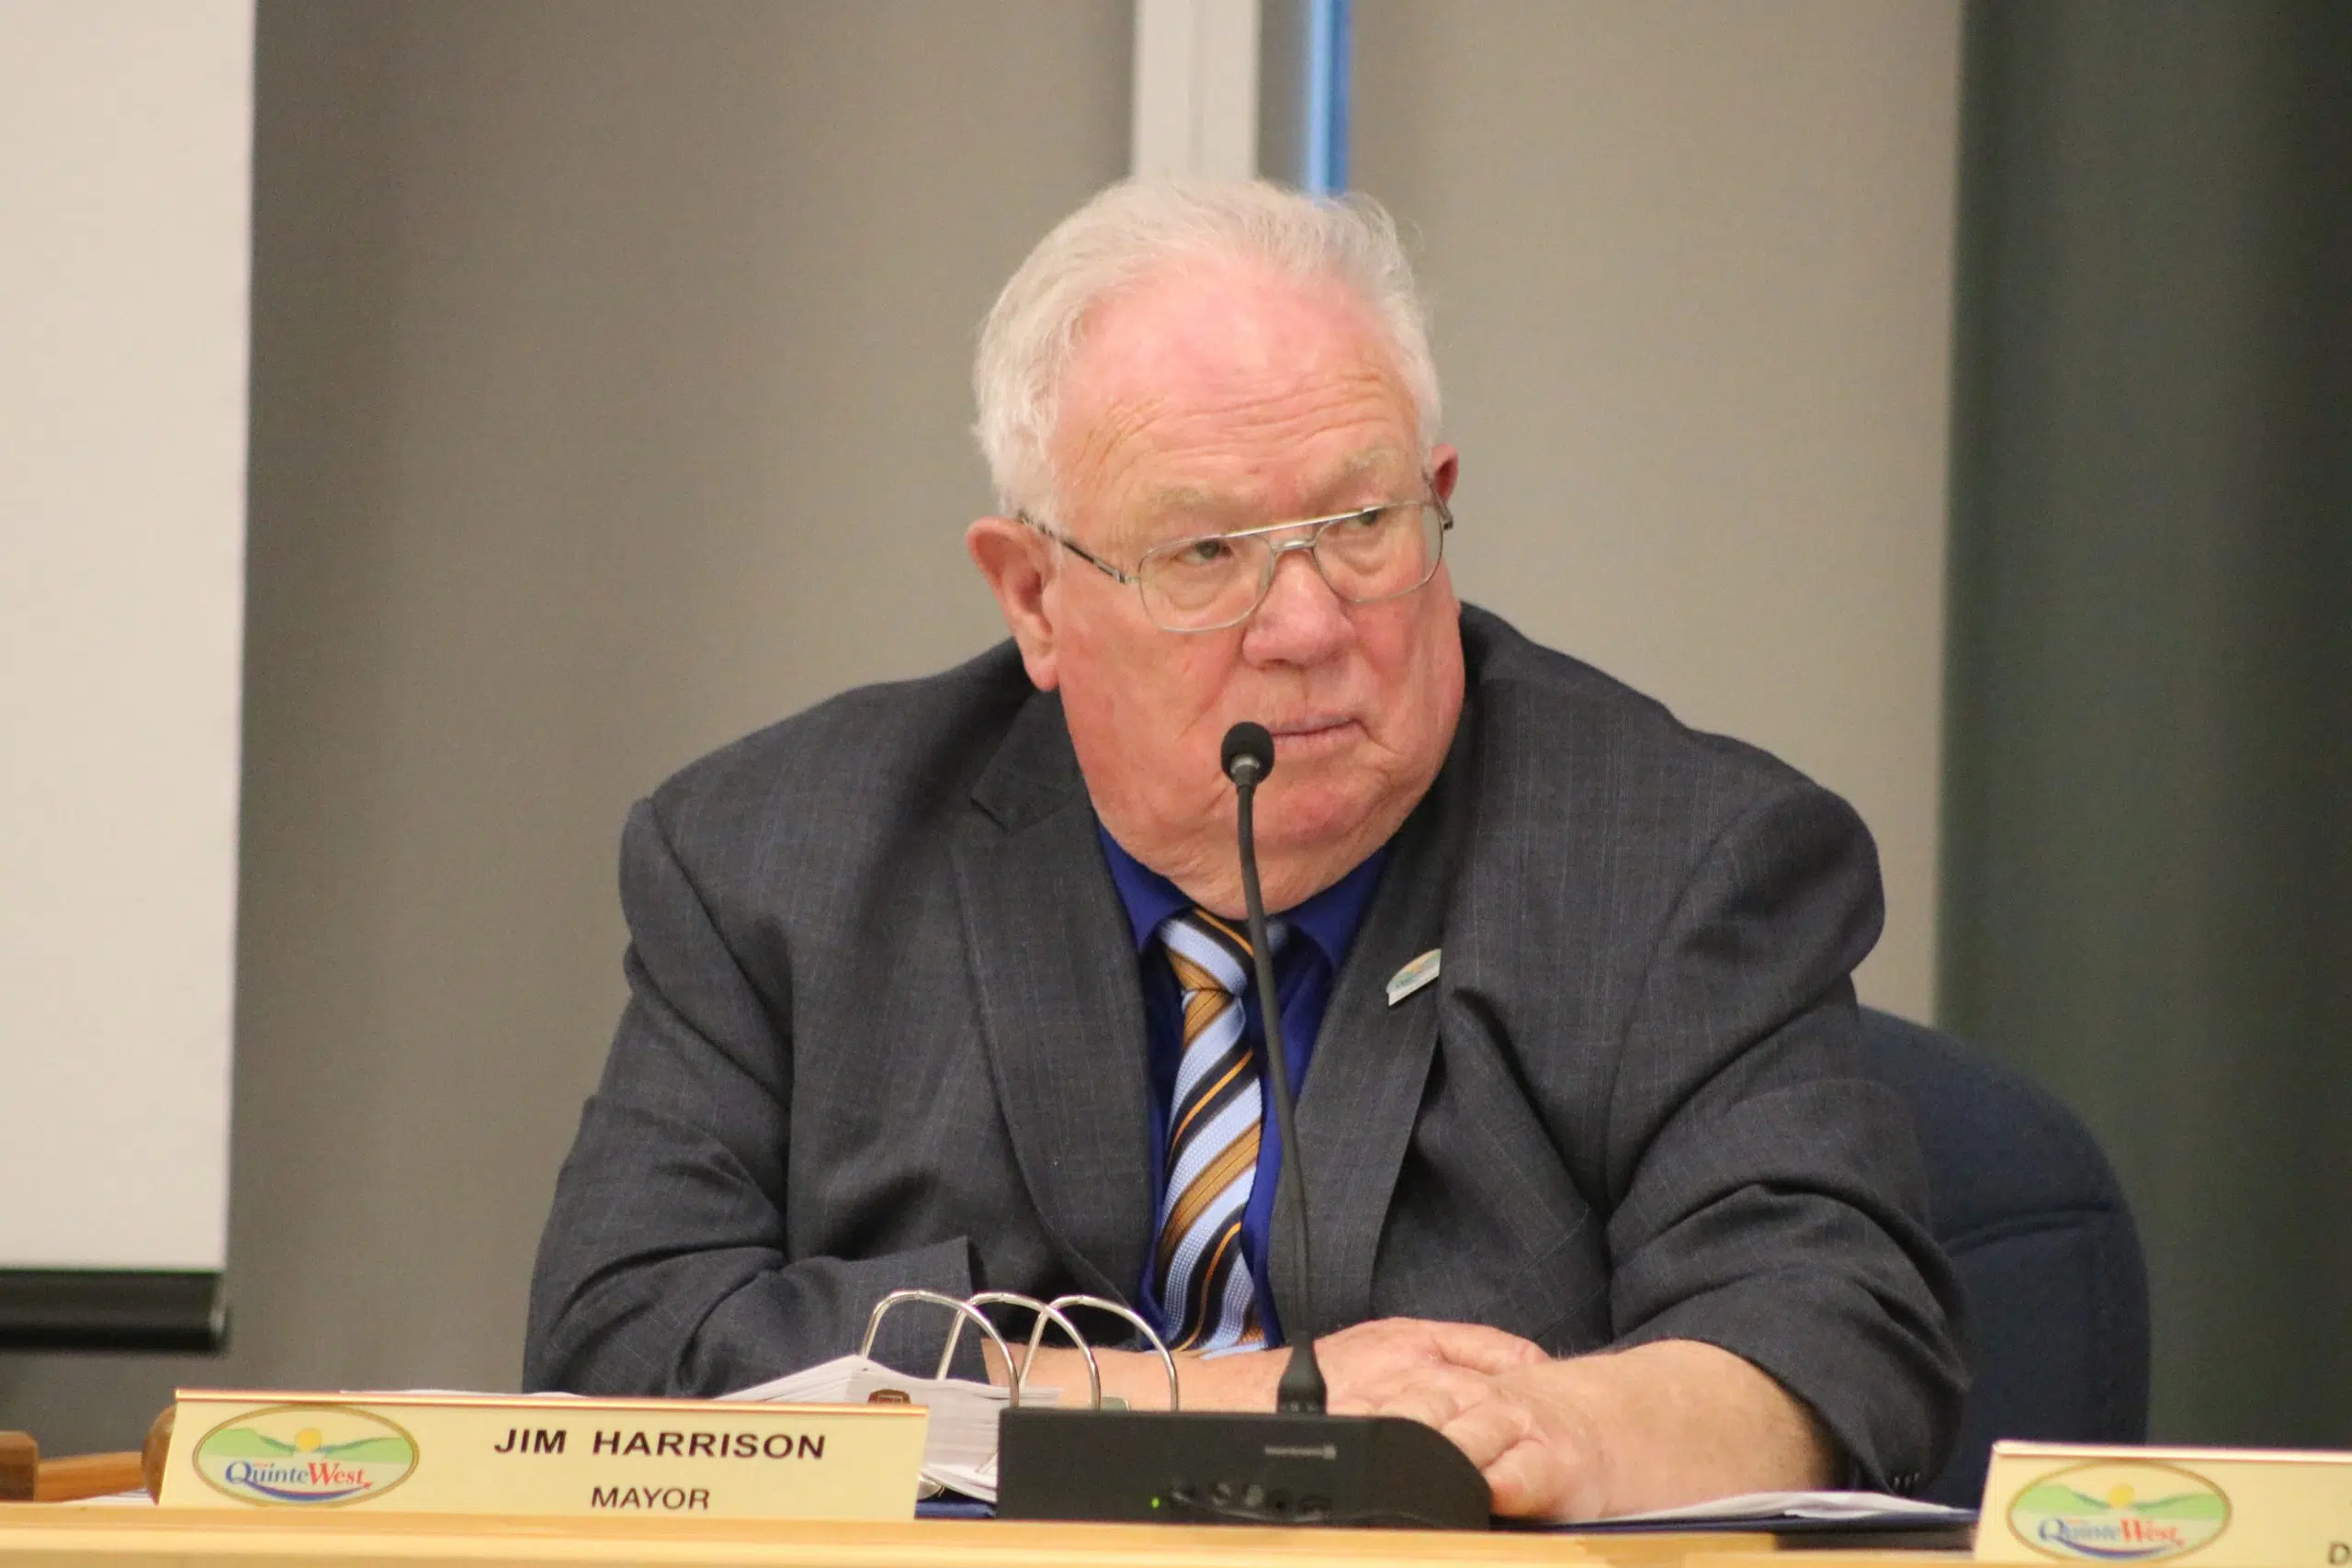 Quinte West Mayor says IJC needs to get on the same page